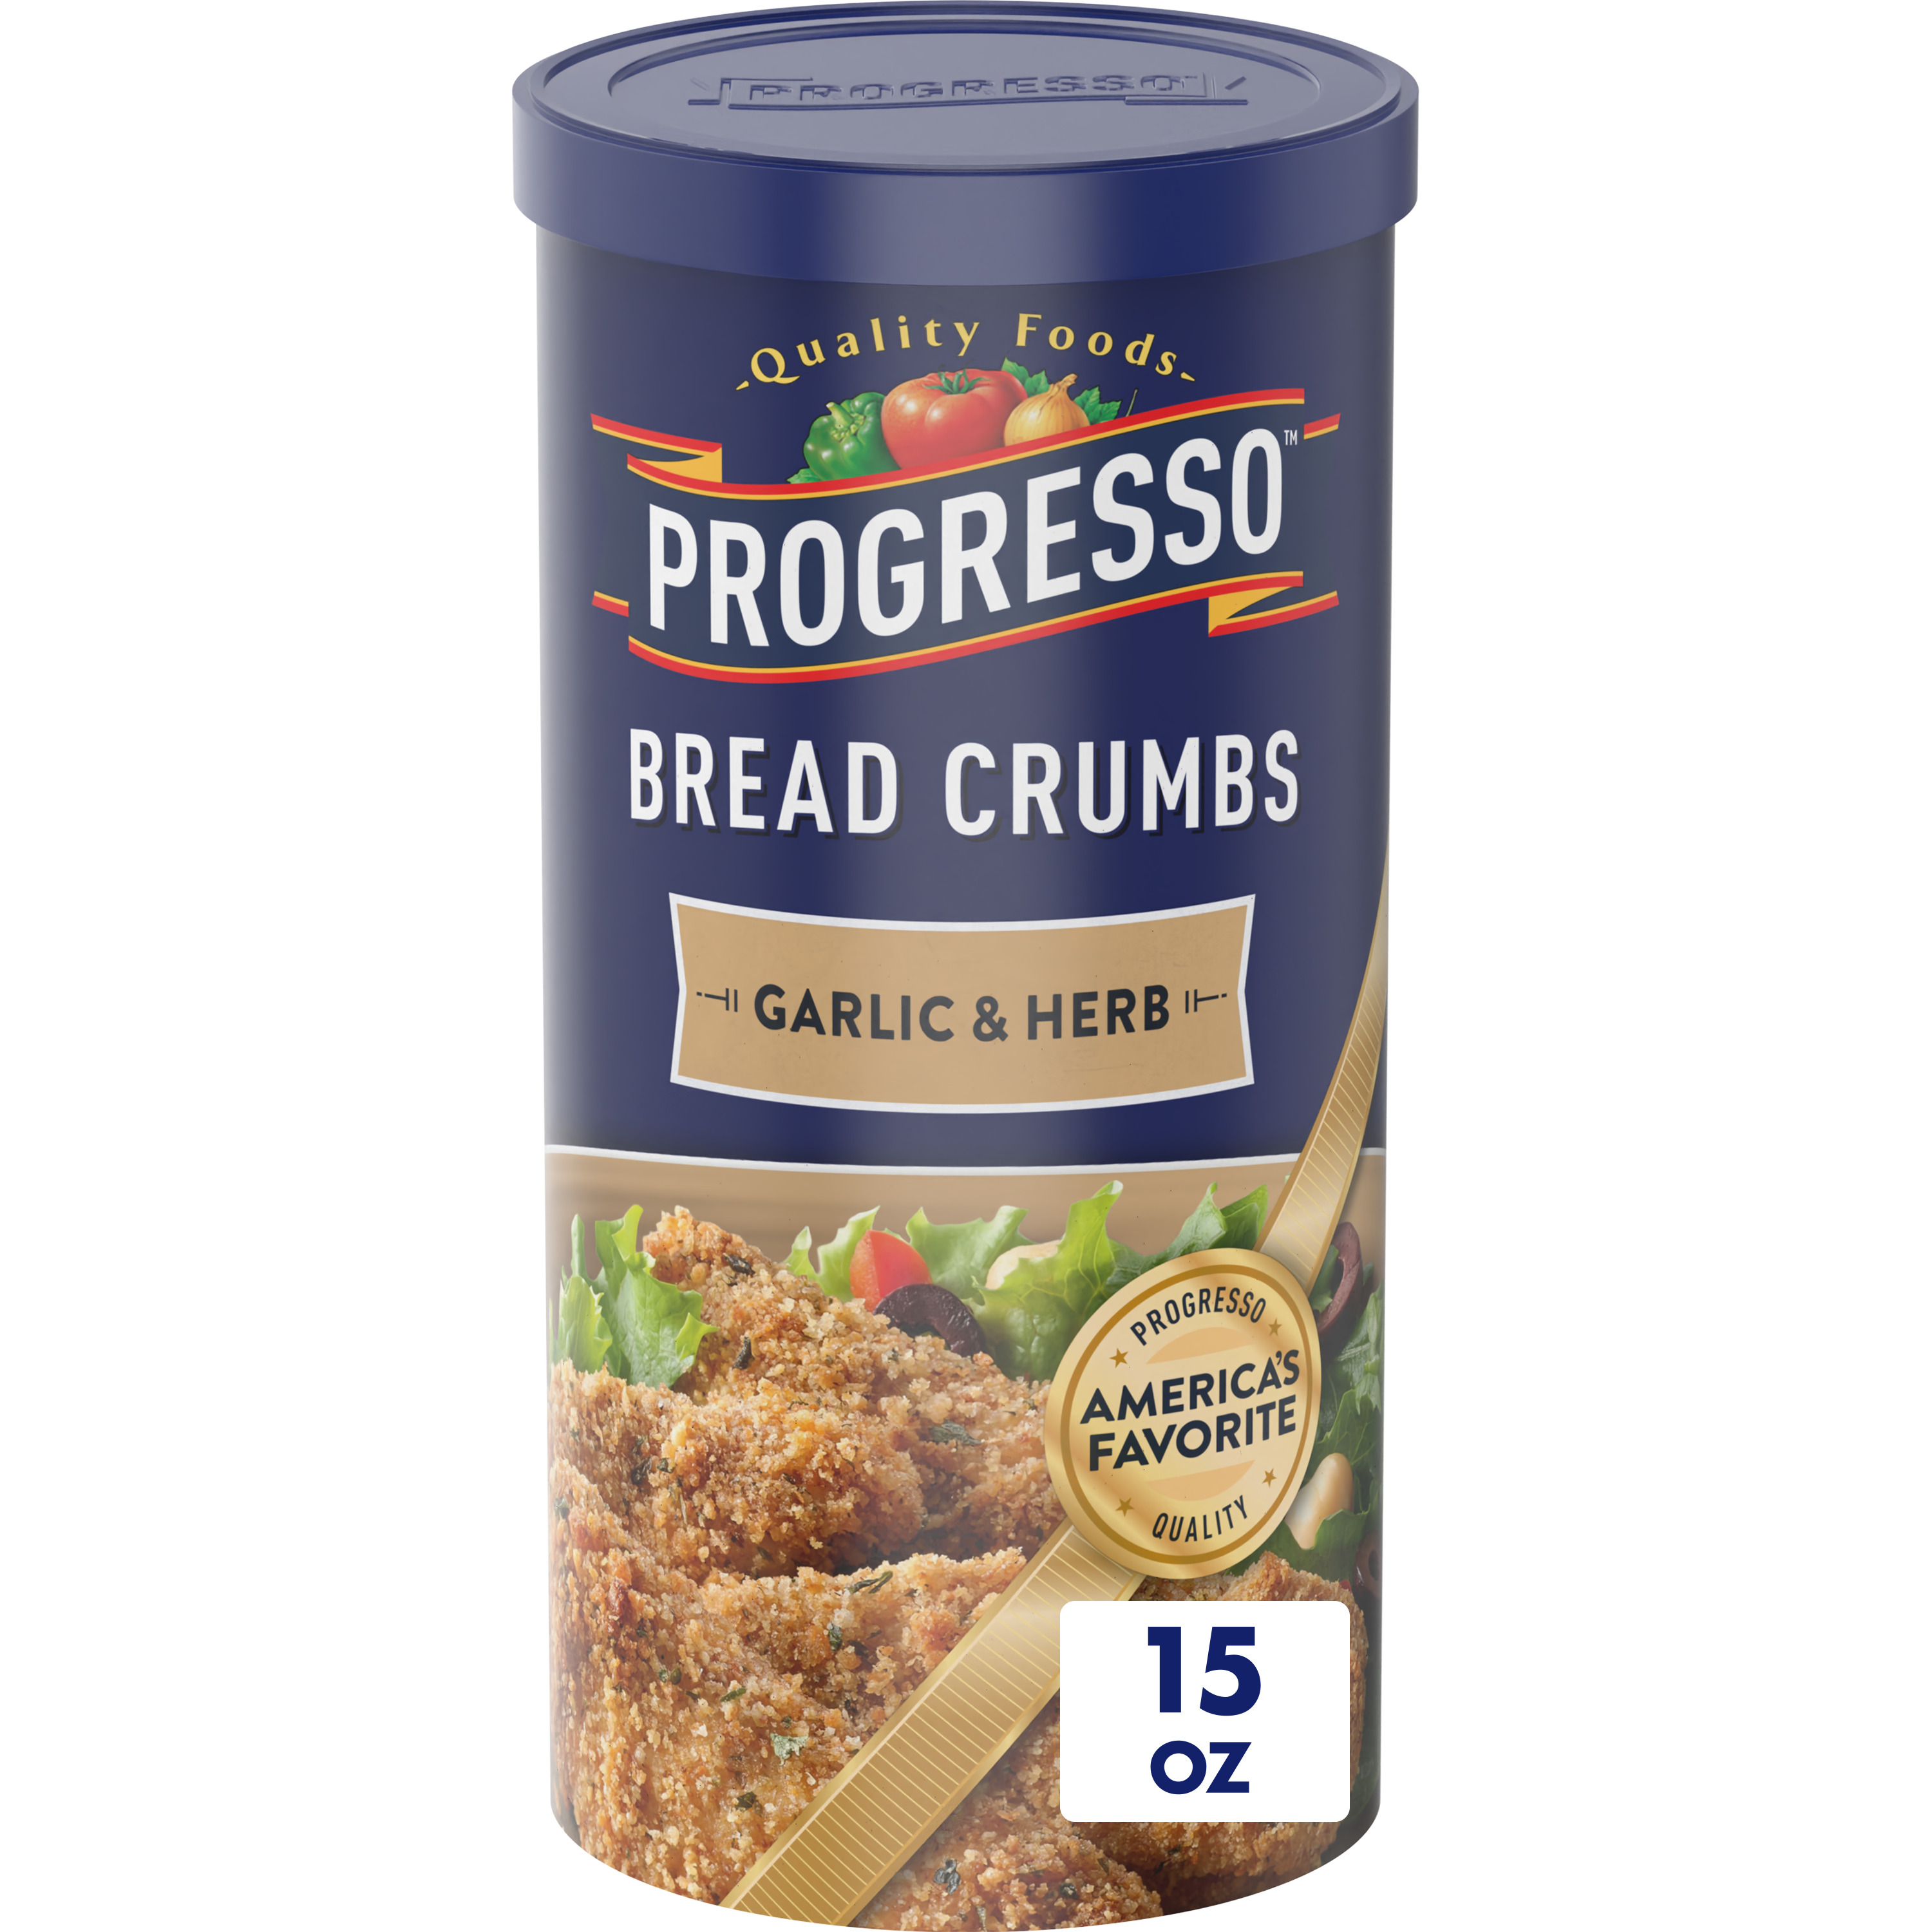 Progresso, Garlic And Herb Bread Crumbs, 15 ounces - image 1 of 9